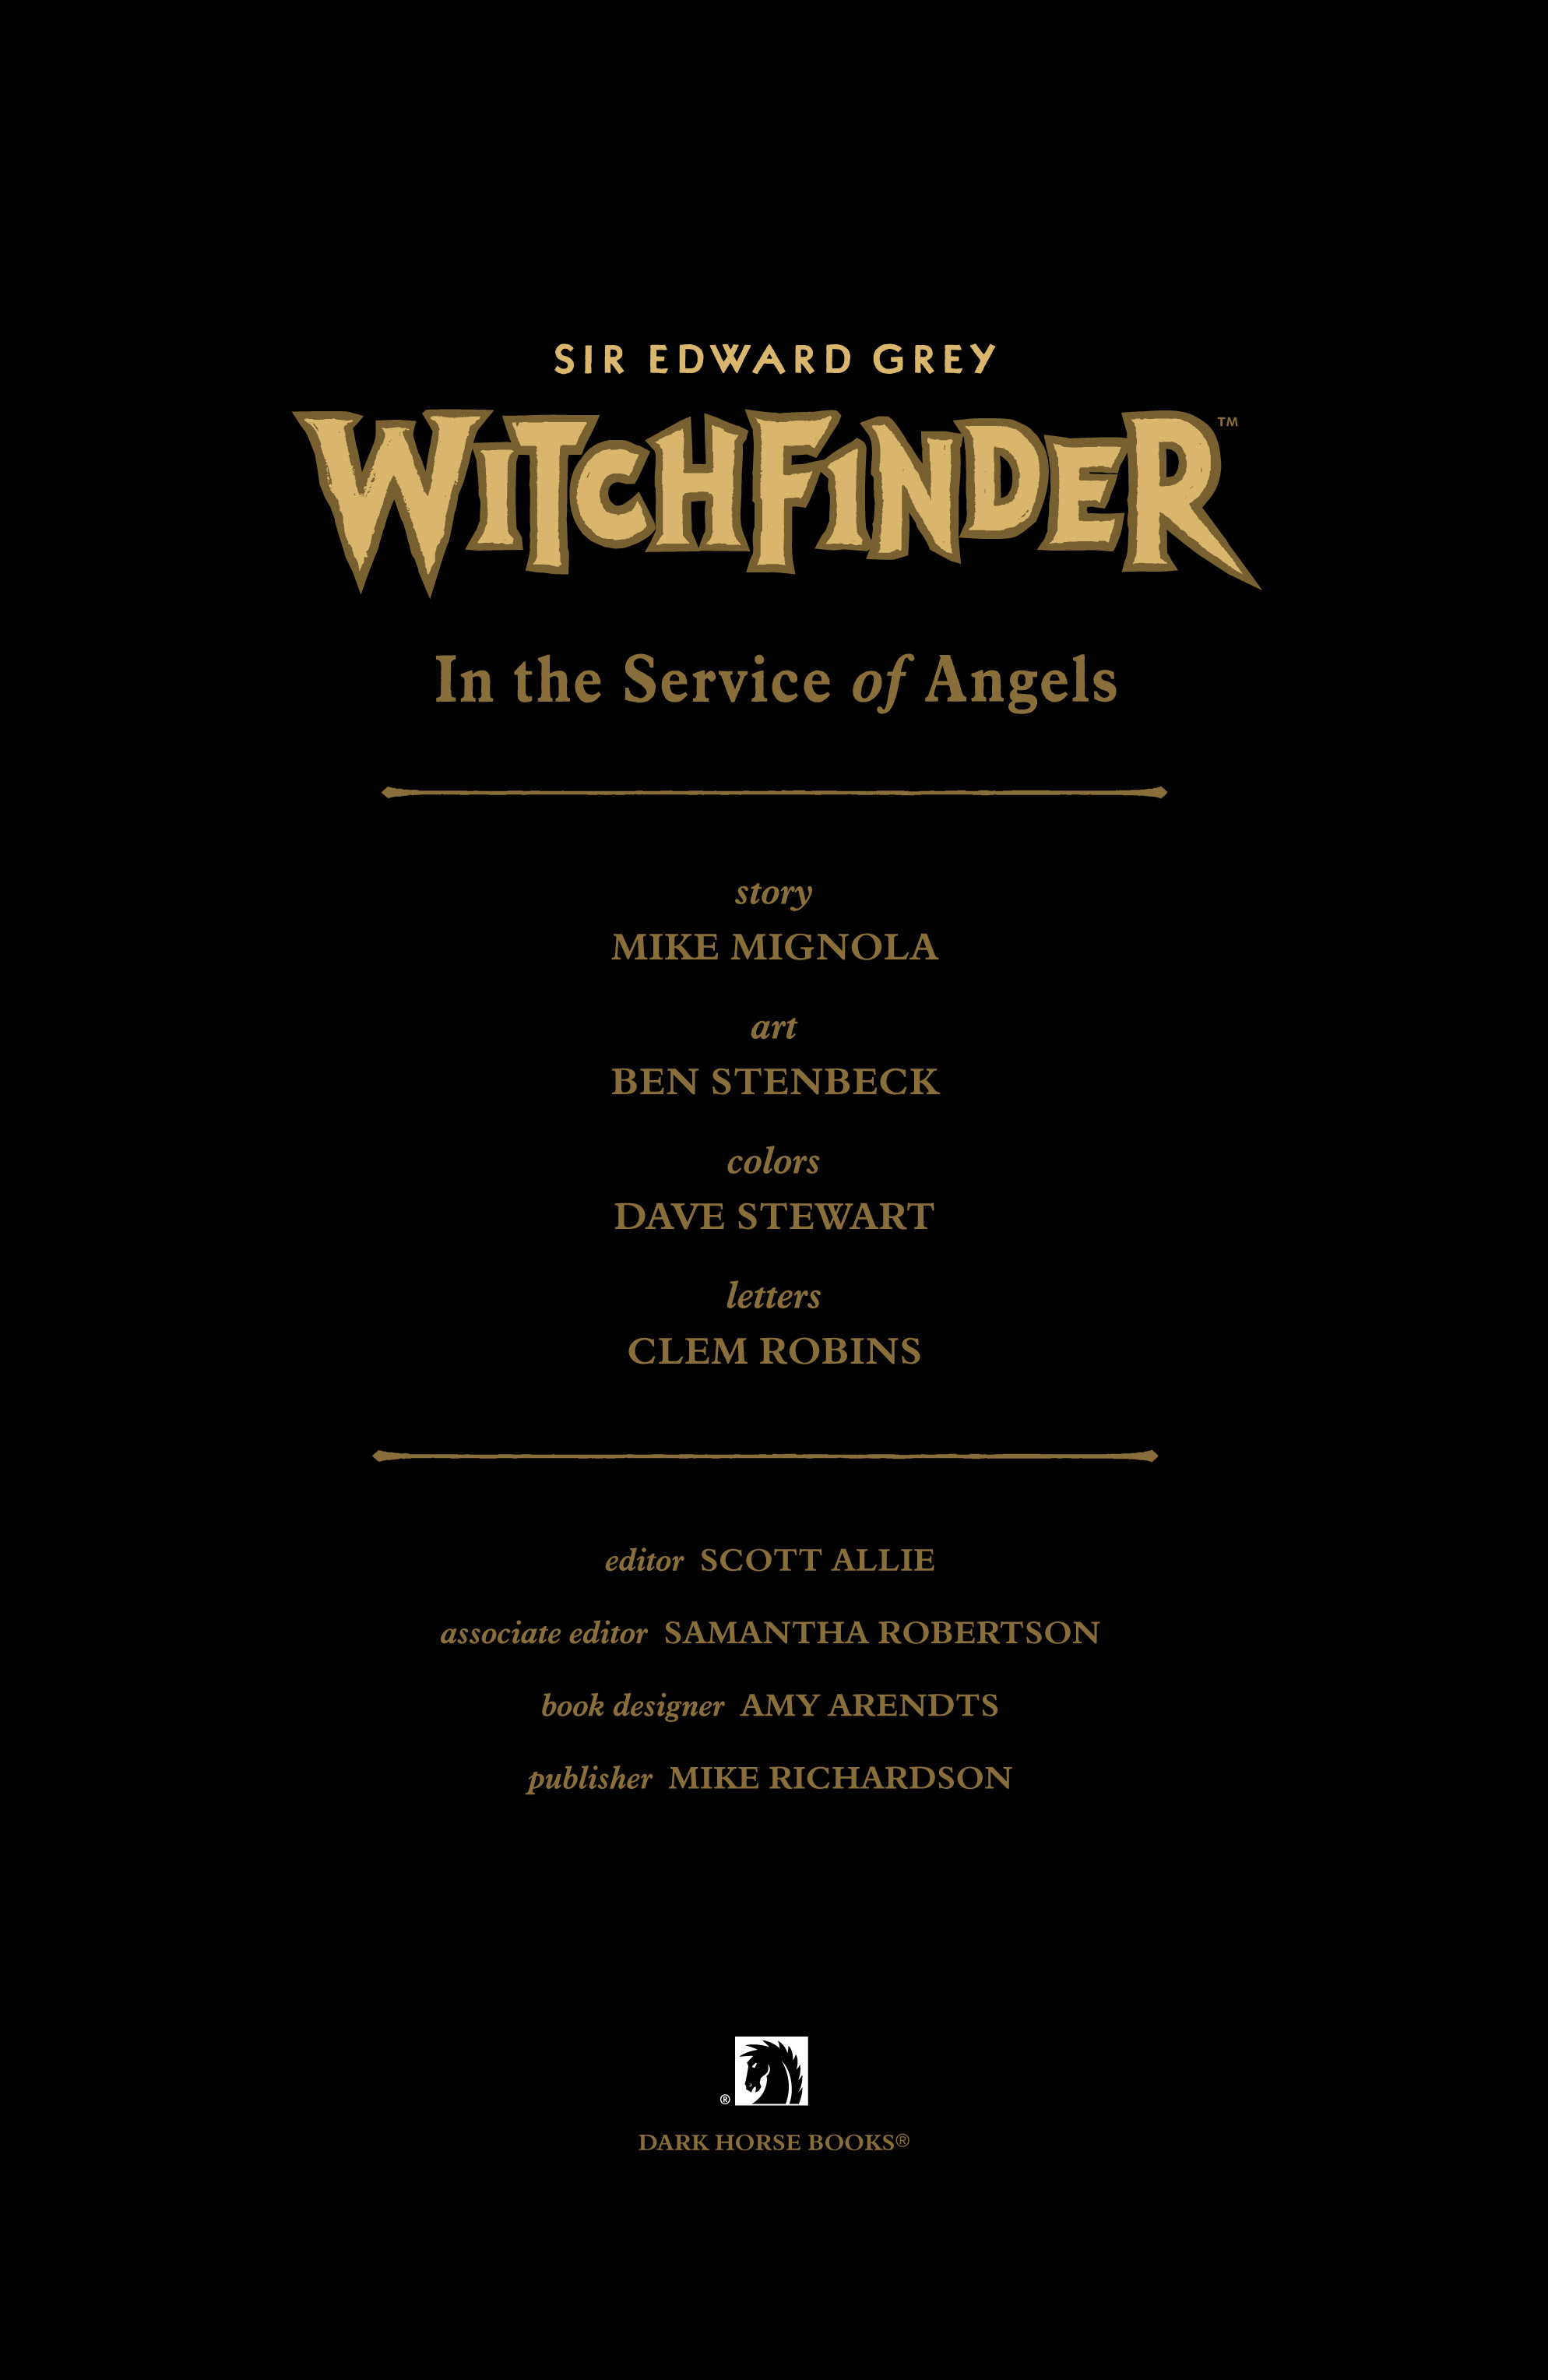 Read online Sir Edward Grey, Witchfinder: In the Service of Angels comic -  Issue # TPB - 4